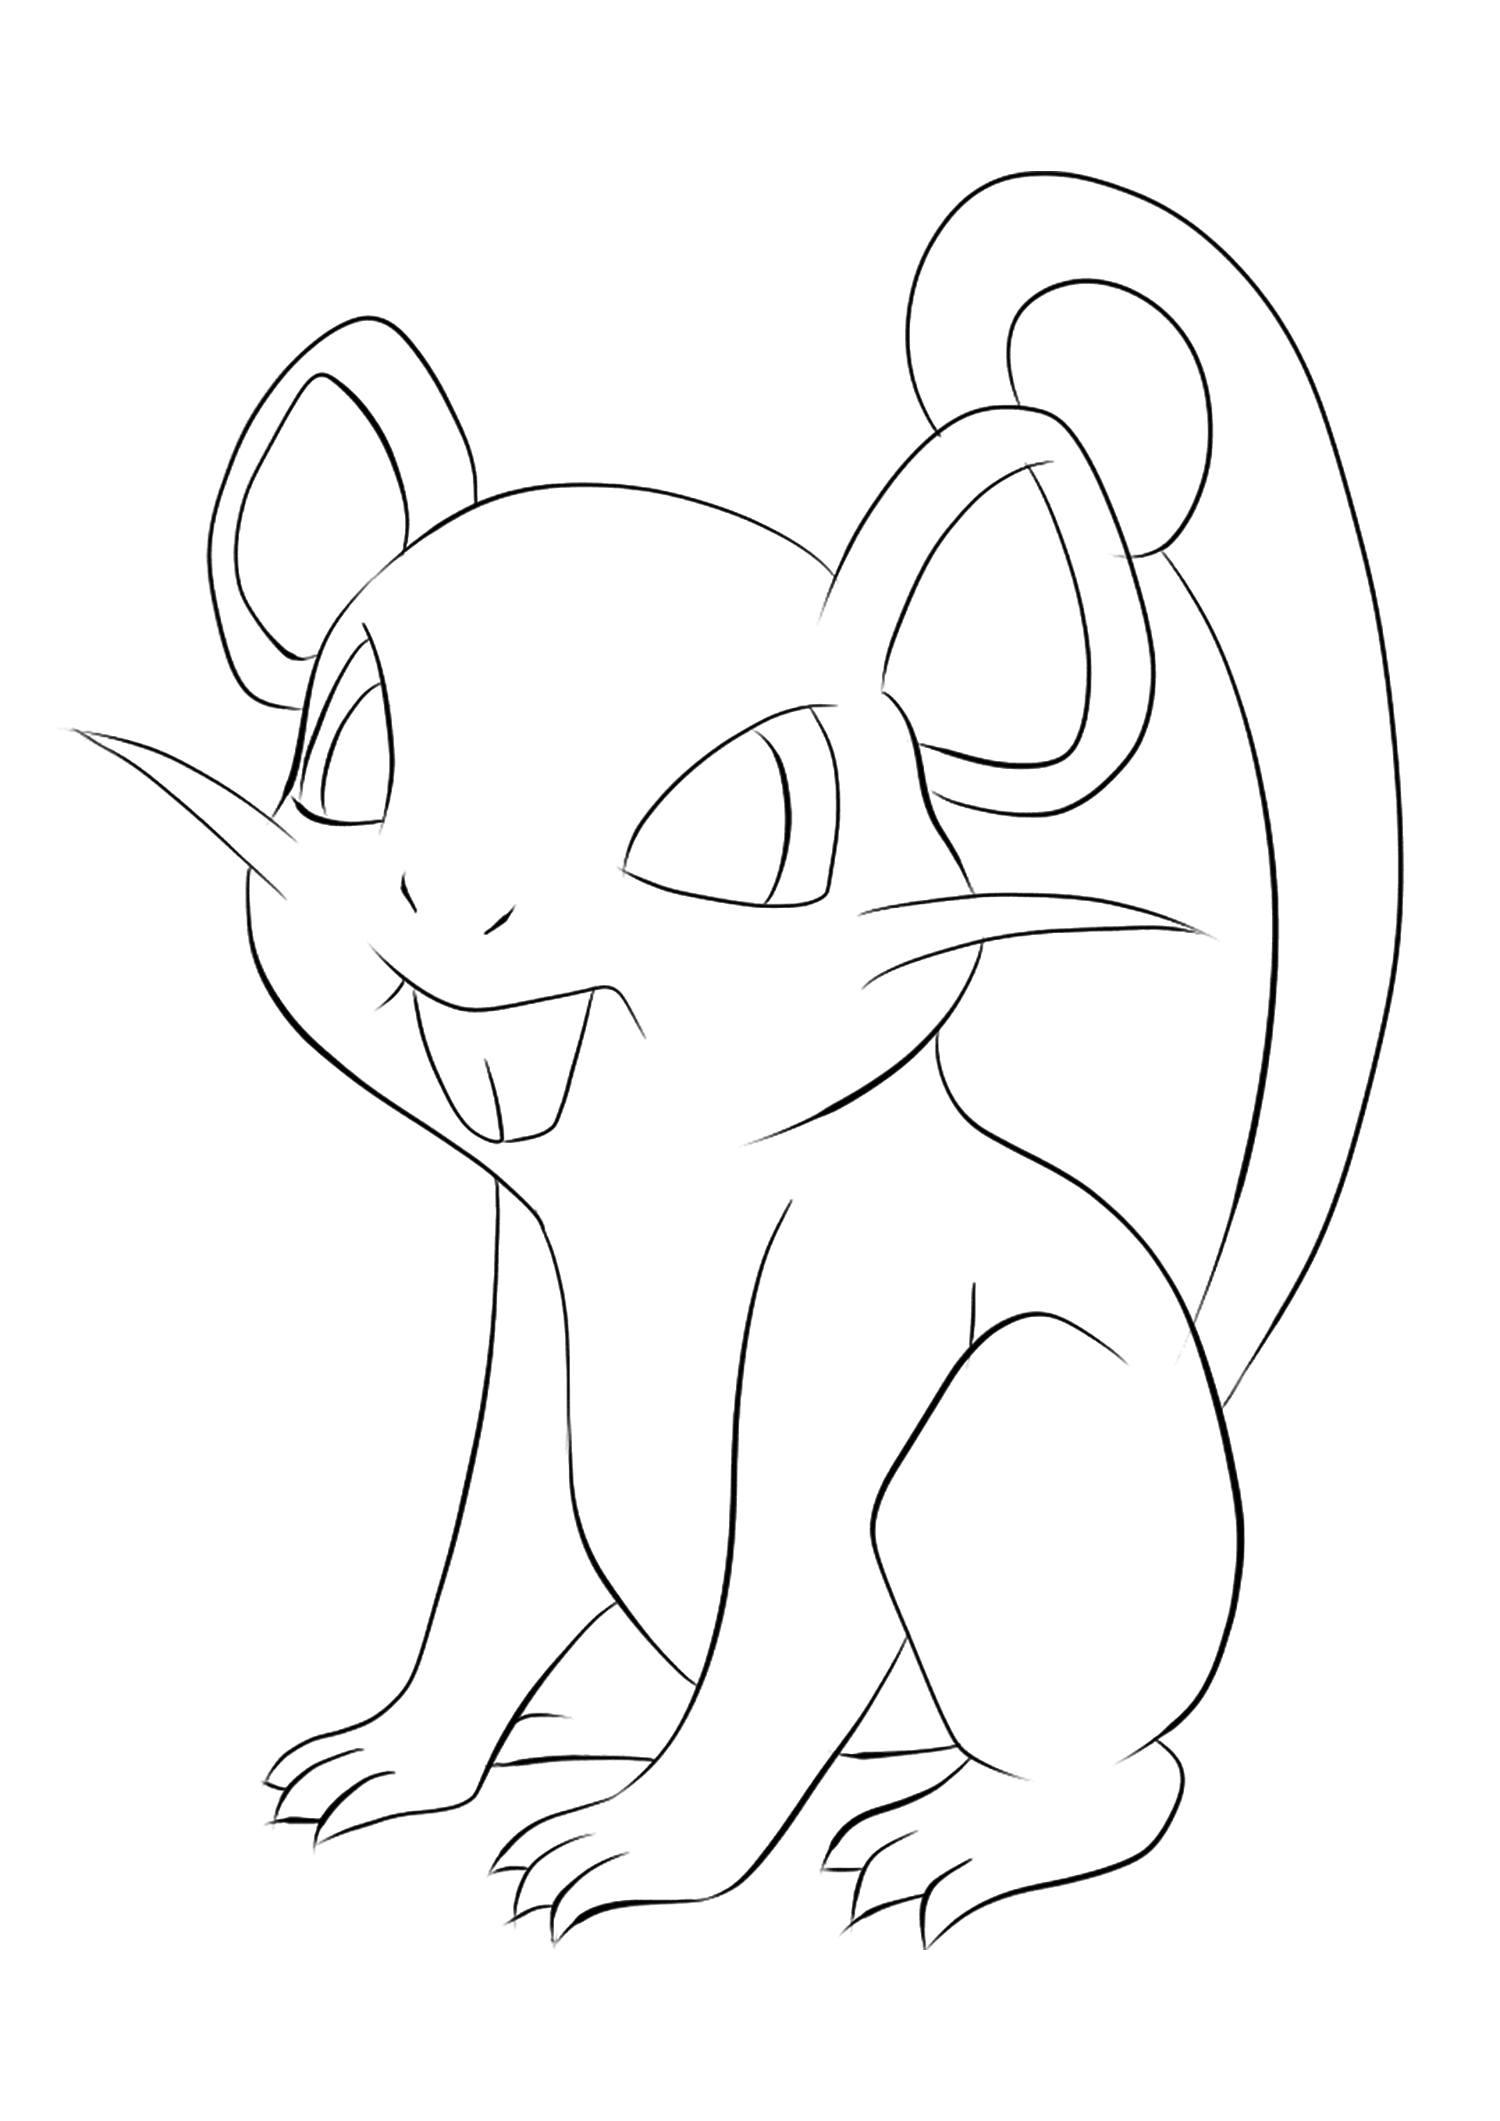 Rattata (No.19). Rattata Coloring page, Generation I Pokemon of type Dark and NormalOriginal image credit: Pokemon linearts by Lilly Gerbil'font-size:smaller;color:gray'>Permission: All rights reserved © Pokemon company and Ken Sugimori.